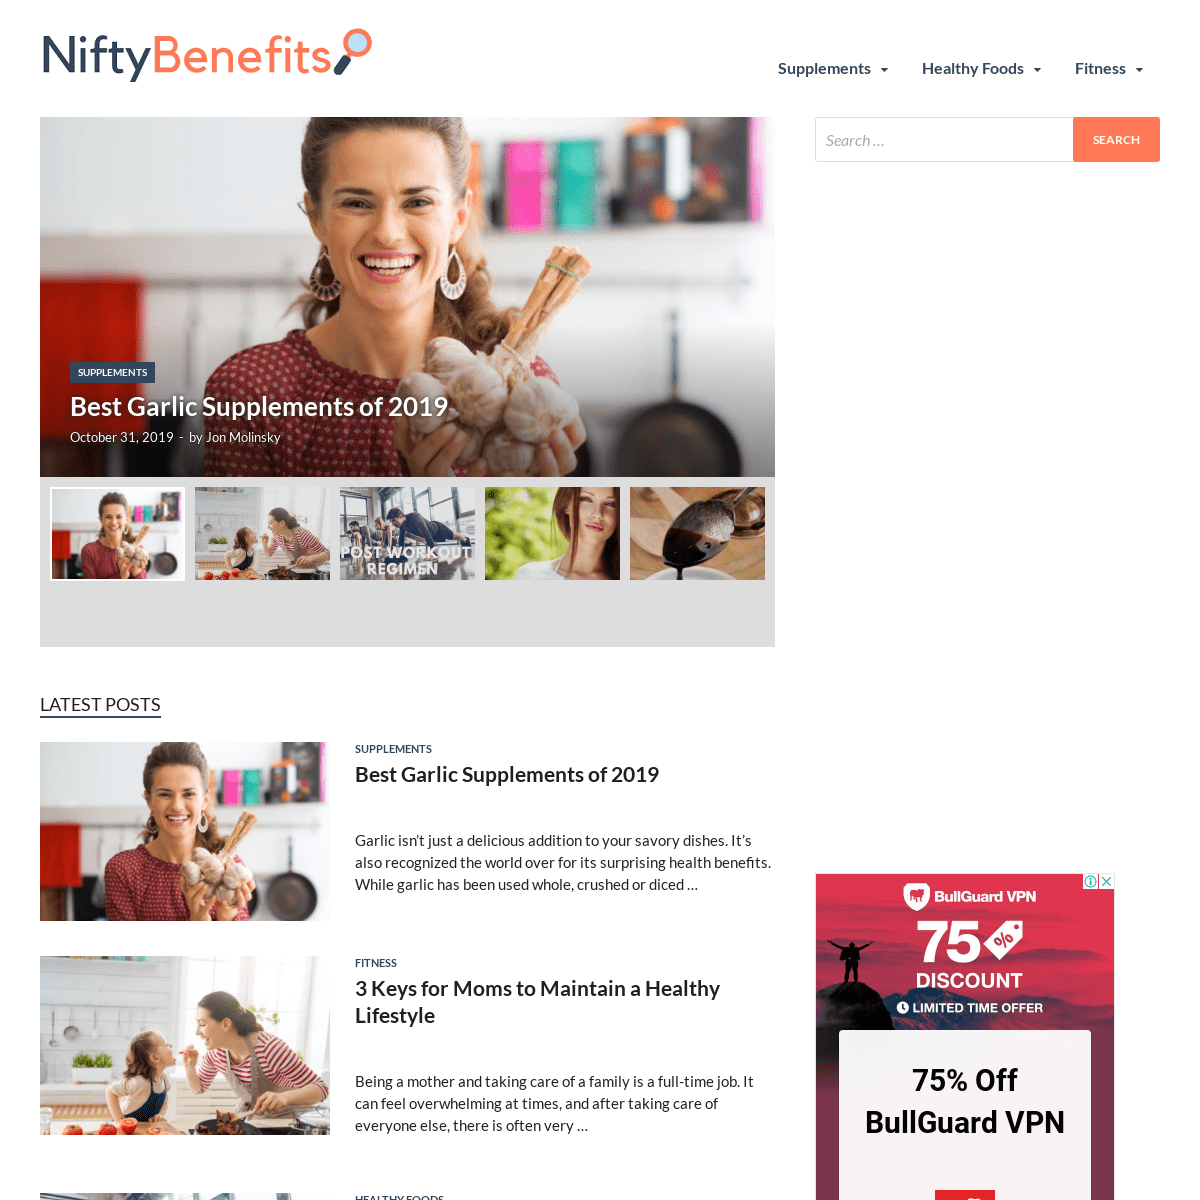 A complete backup of niftybenefits.com